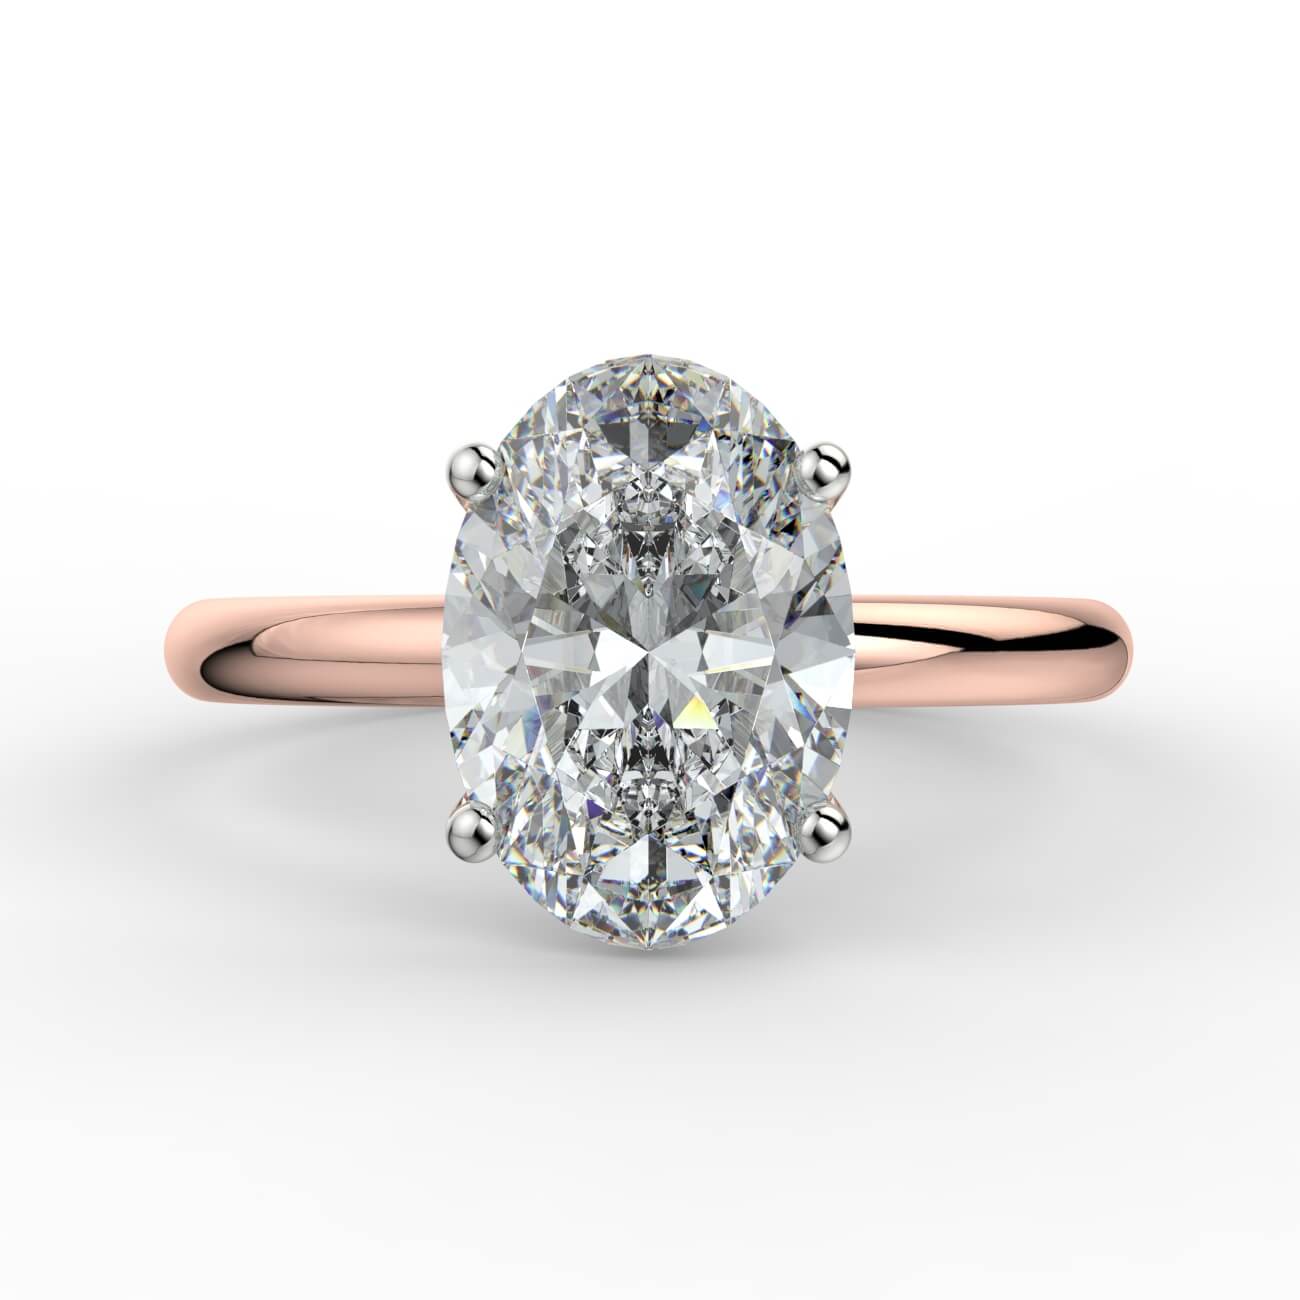 Solitaire oval diamond engagement ring in white and rose gold – Australian Diamond Network